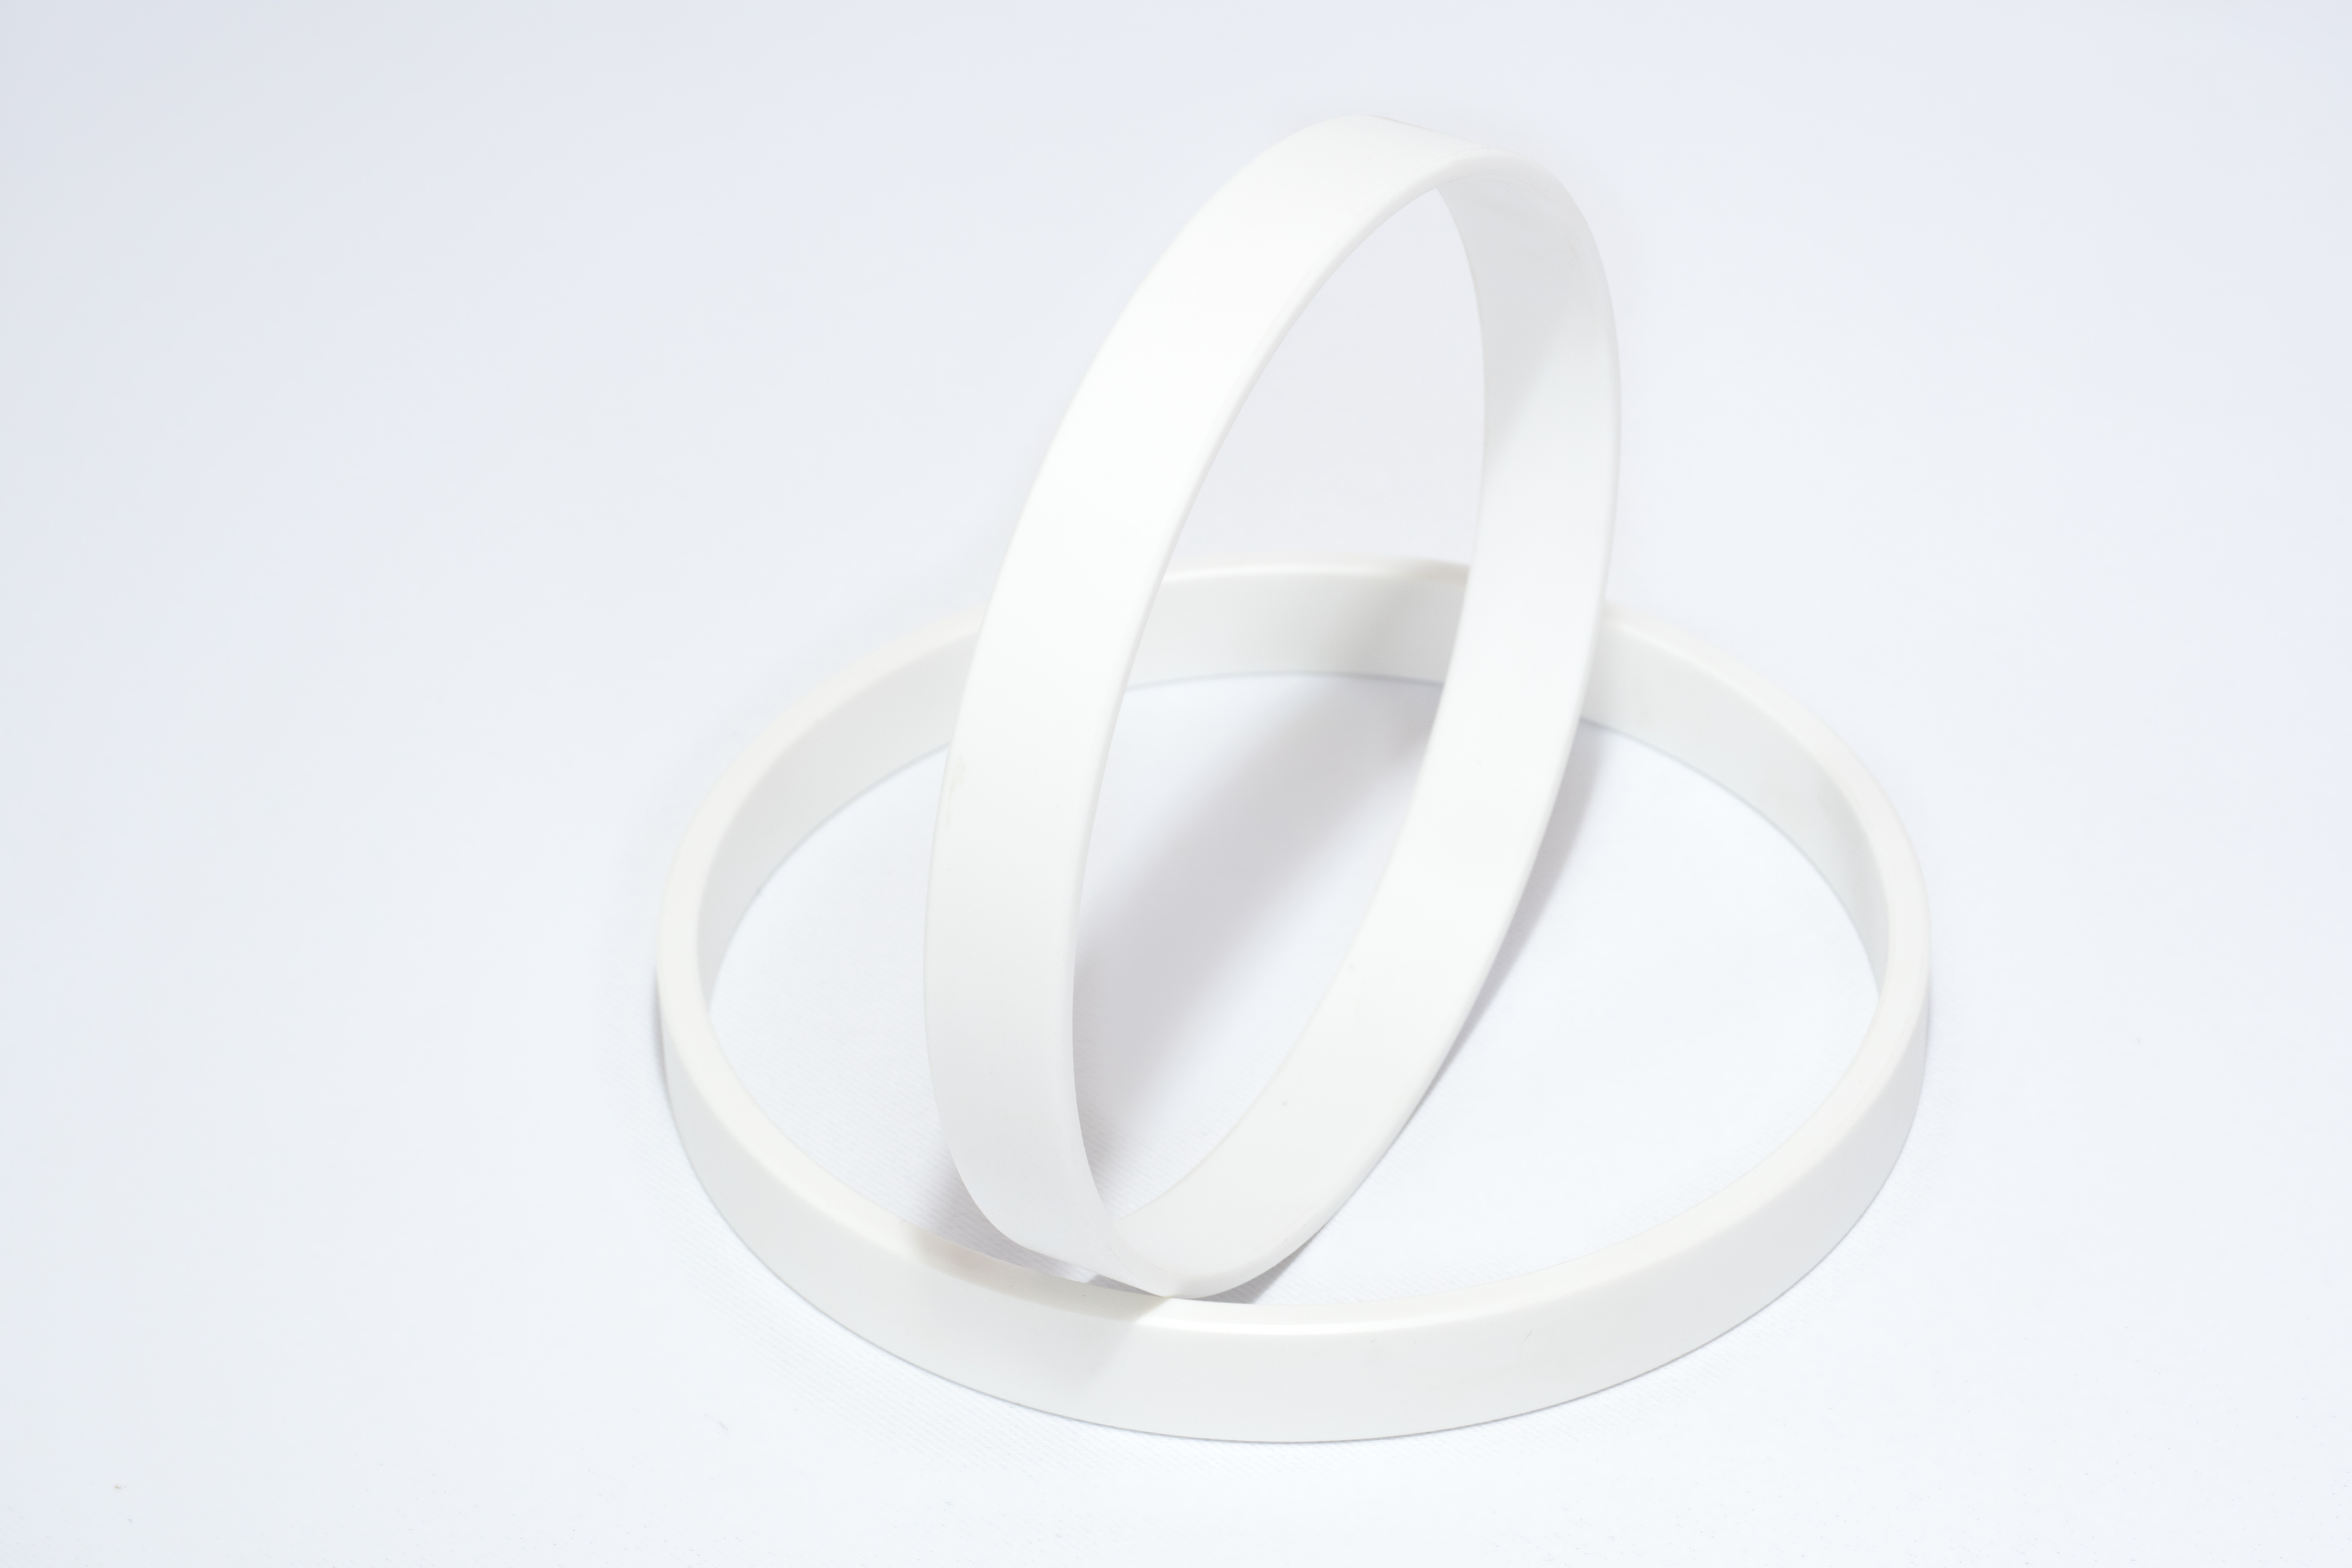 The Vesconite Hilube polymer wear rings which were part of a study by an OEM to compare energy savings.